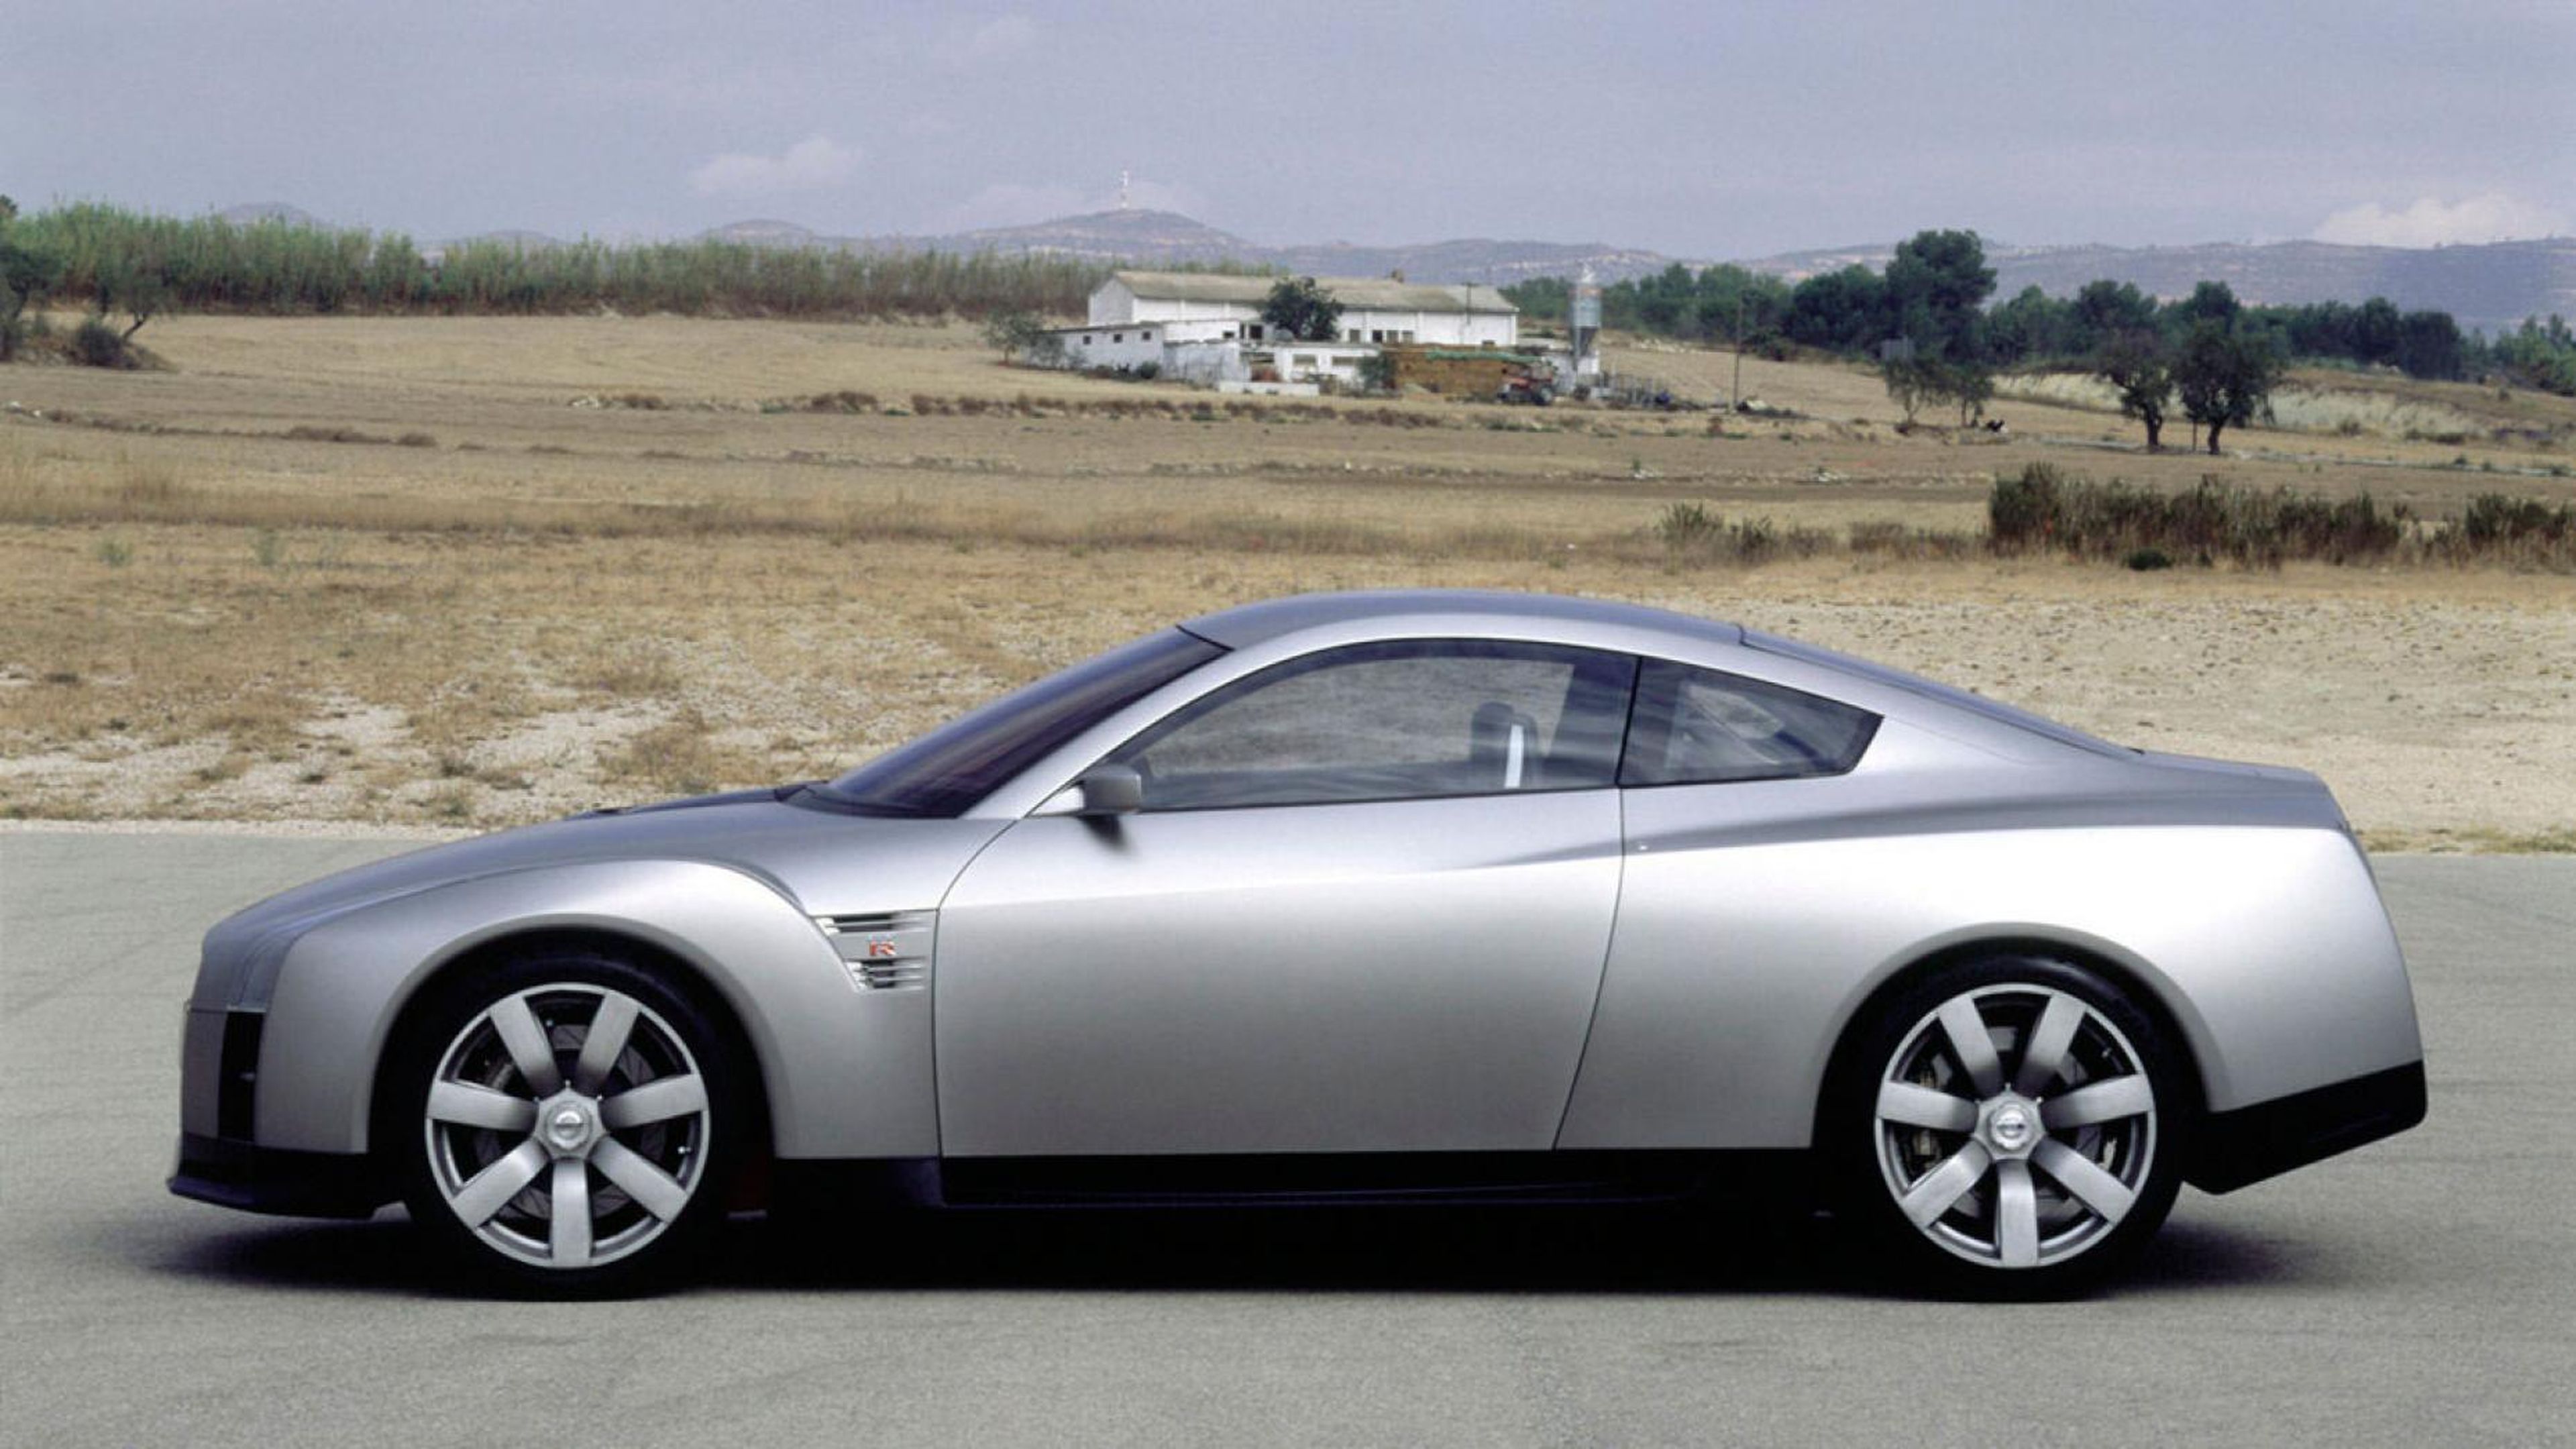 Nissan Skyline GT-R concept lateral